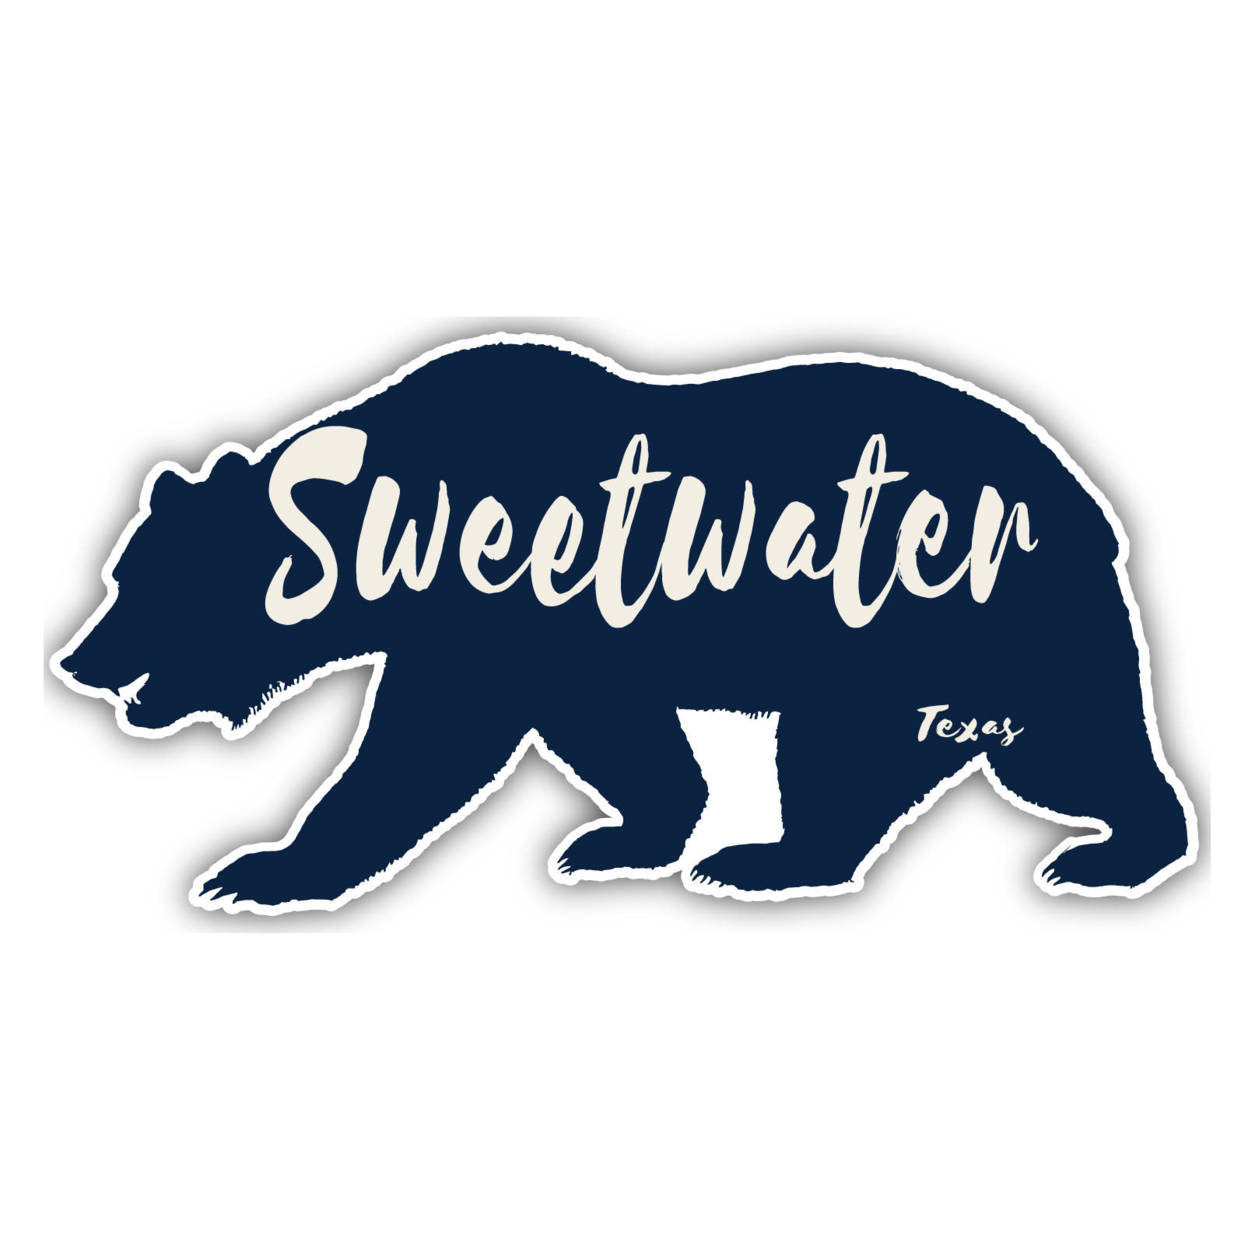 Sweetwater Texas Souvenir Decorative Stickers (Choose Theme And Size) - Single Unit, 2-Inch, Bear